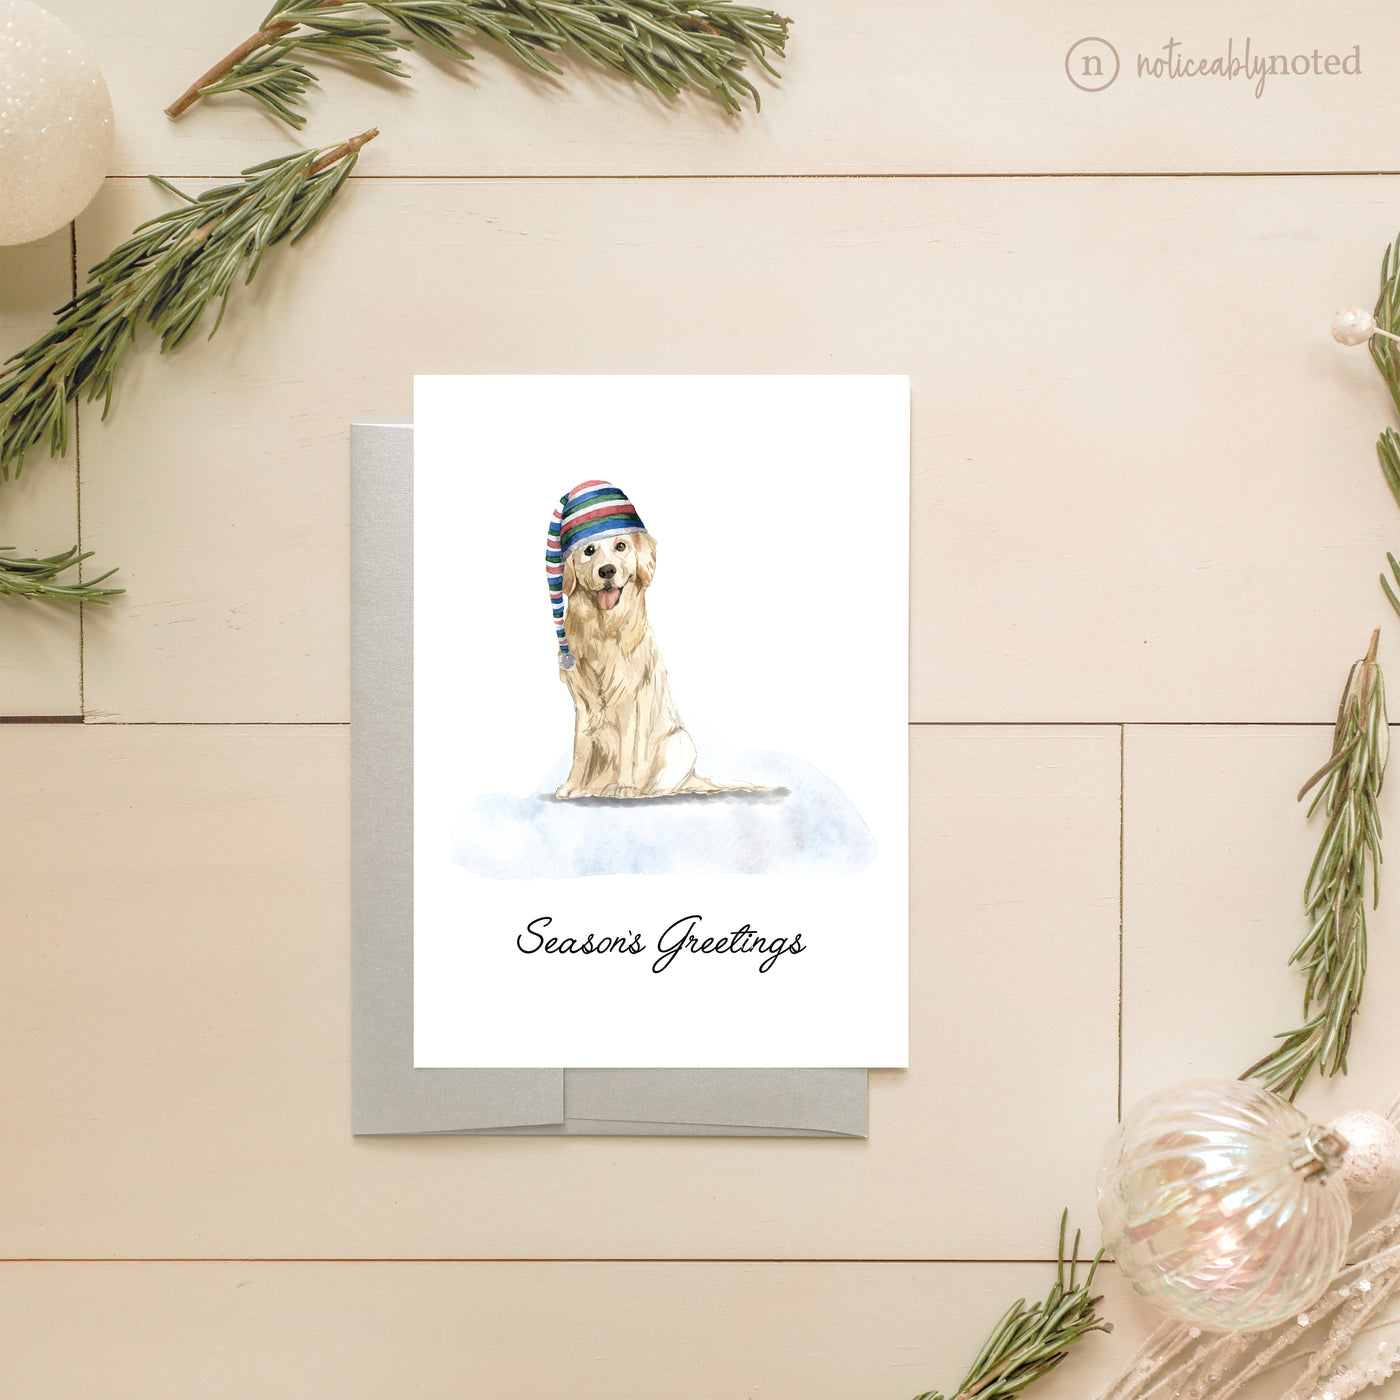 Golden Retriever Dog Christmas Card | Noticeably Noted